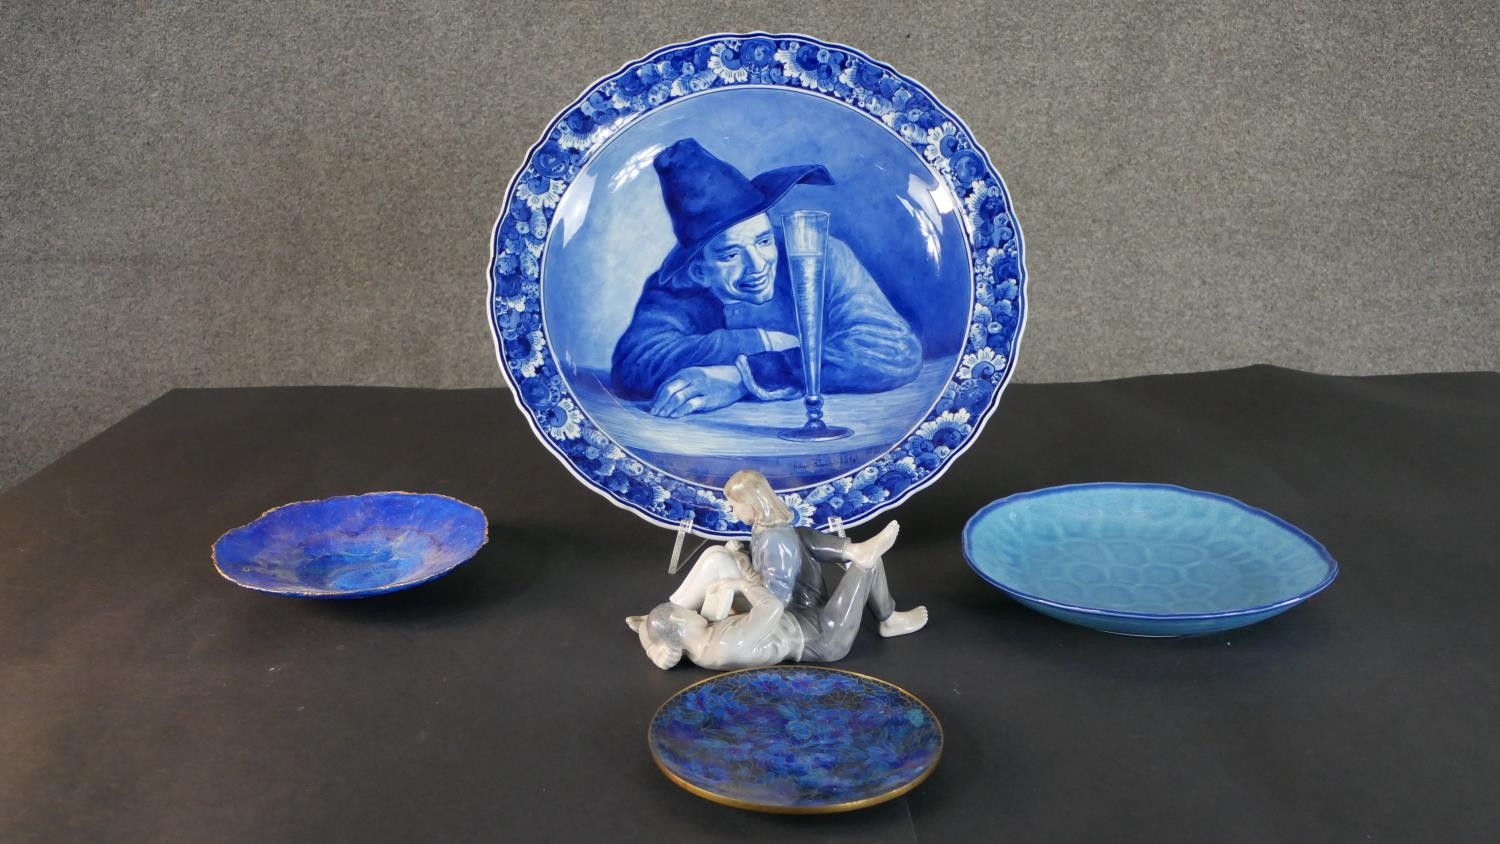 A collection of plates and a ceramic figure, including a Royal Copenhagen hand painted porcelain